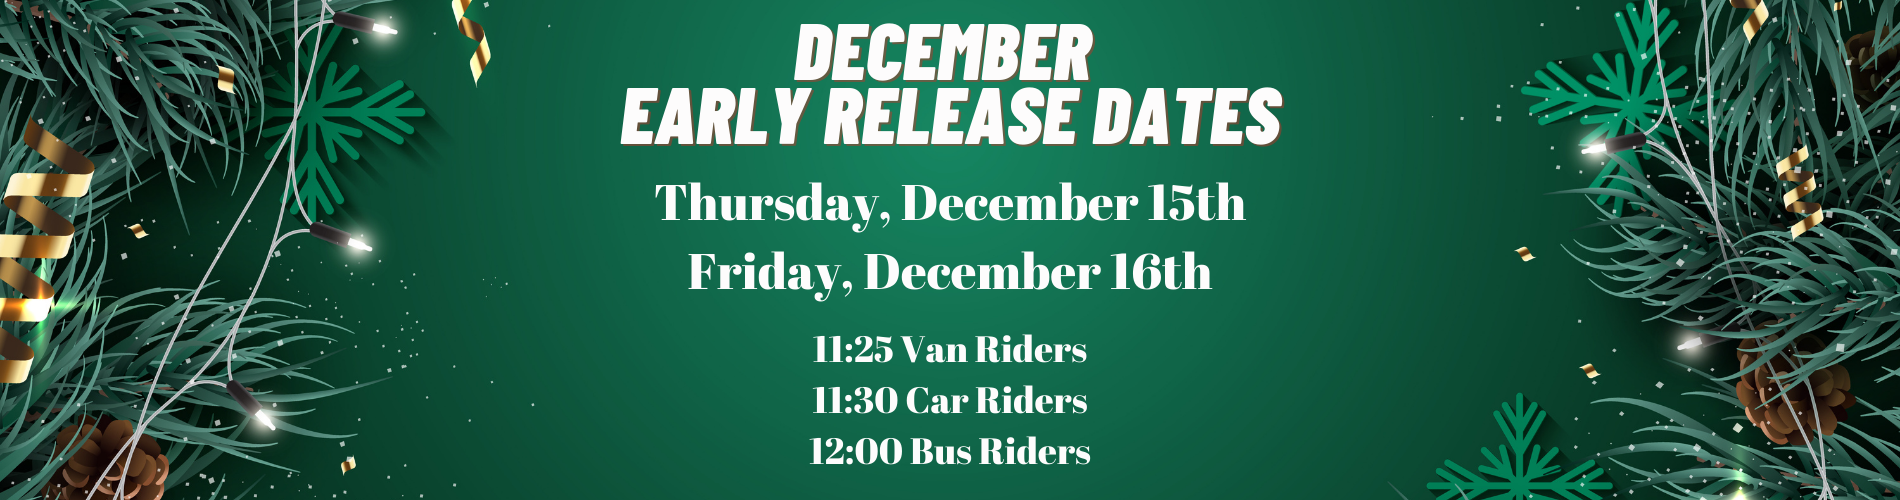 December Early Release Days